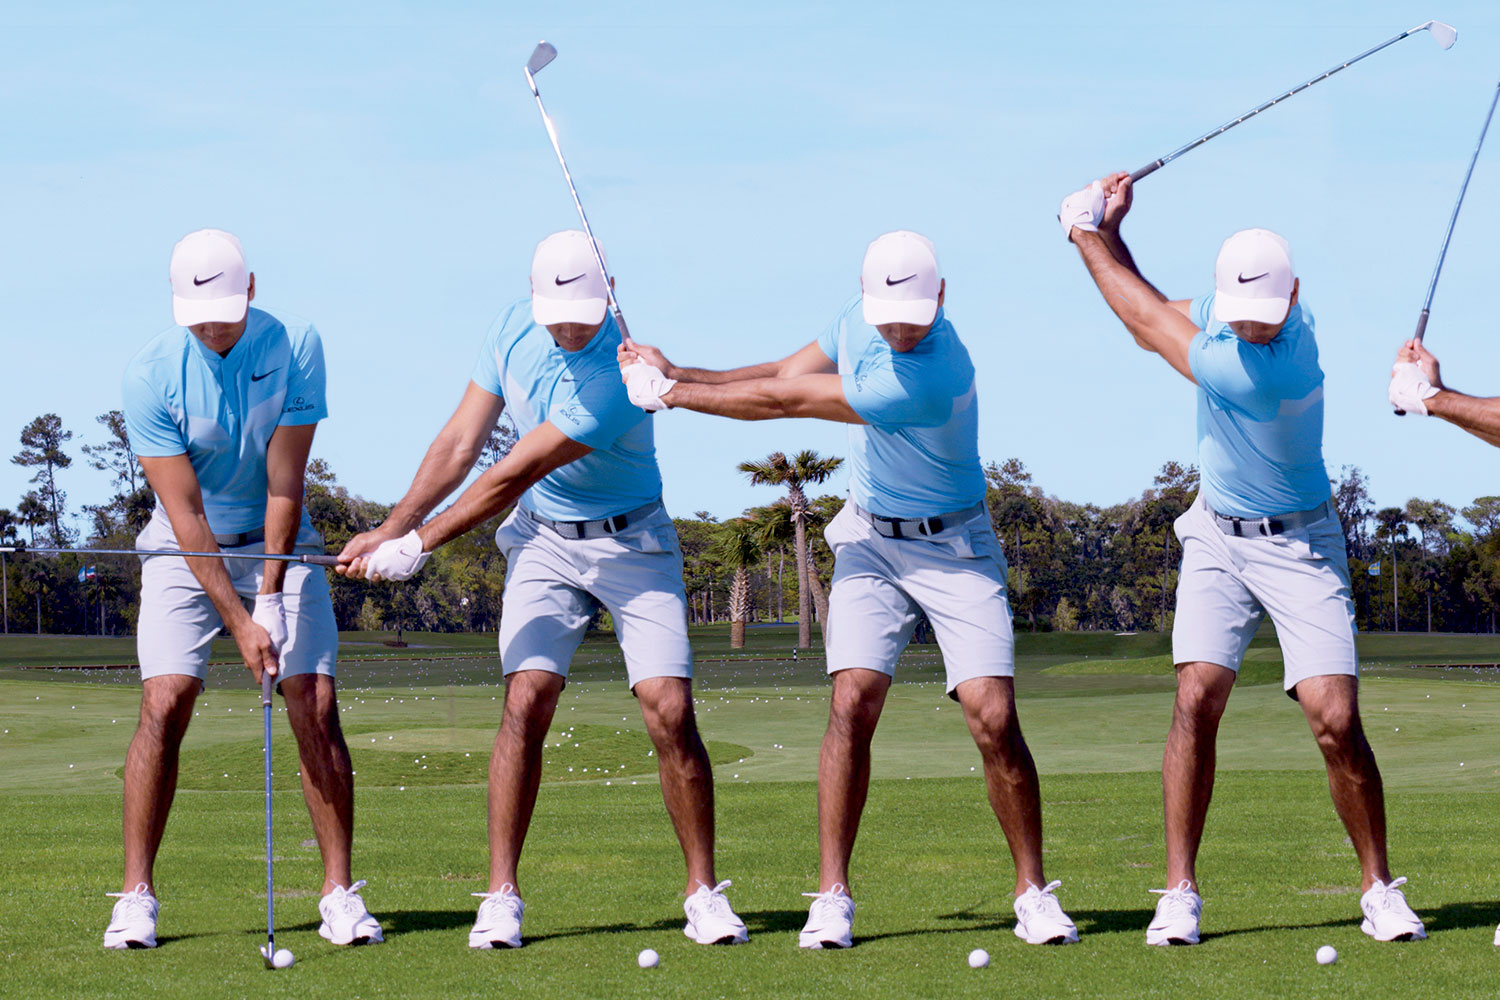 Swing Sequence: Jason Day